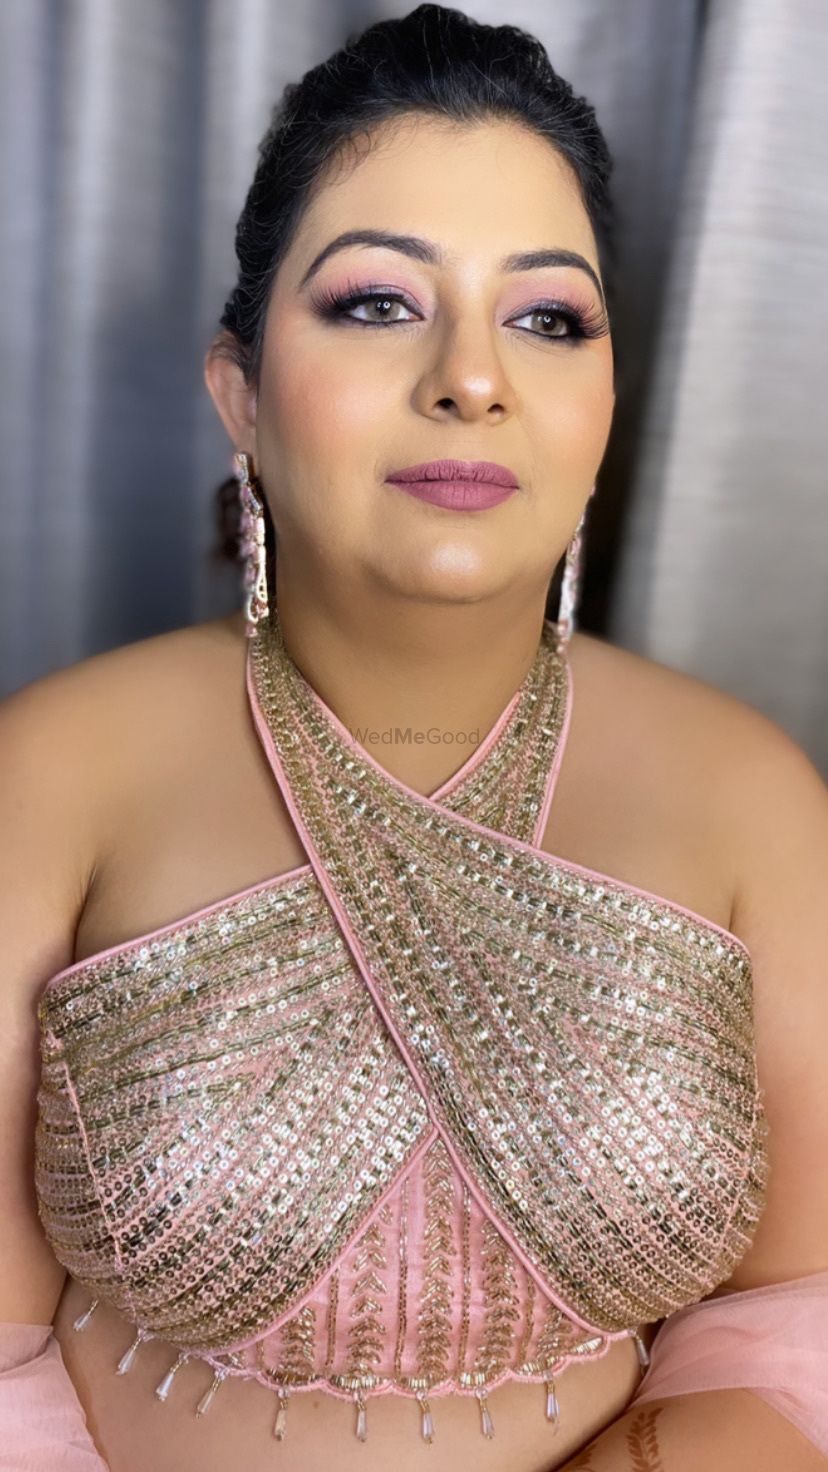 Photo By Makeover By Stuti - Bridal Makeup